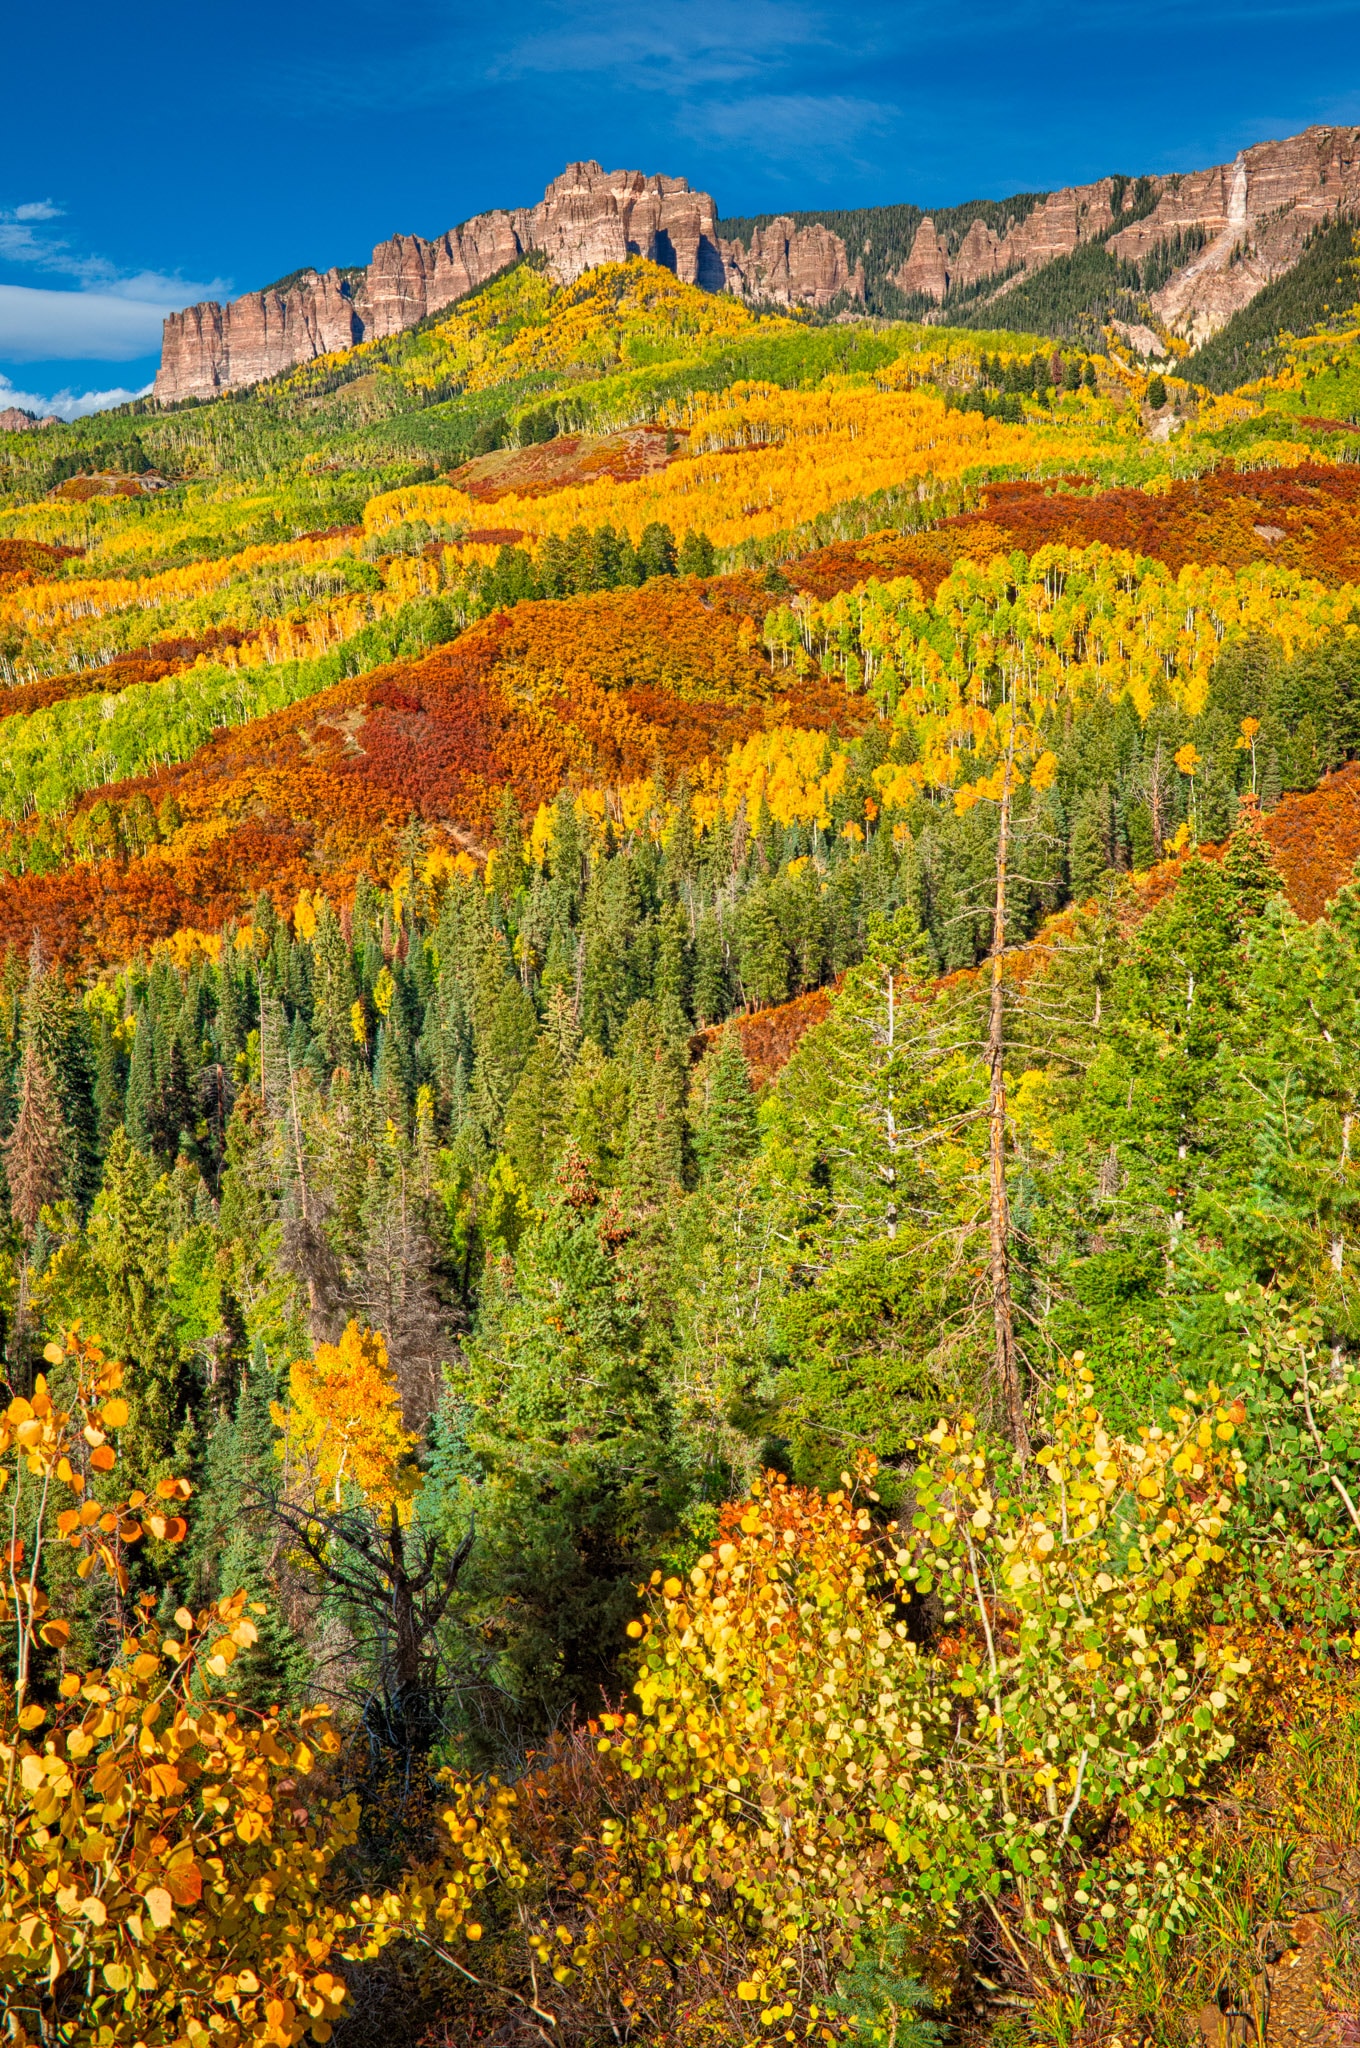 Russet oaks and golden aspens lead the eye up to the Cimarron Mountains as seen from Owl Creek Pass Road near Ridgway, Colorado.